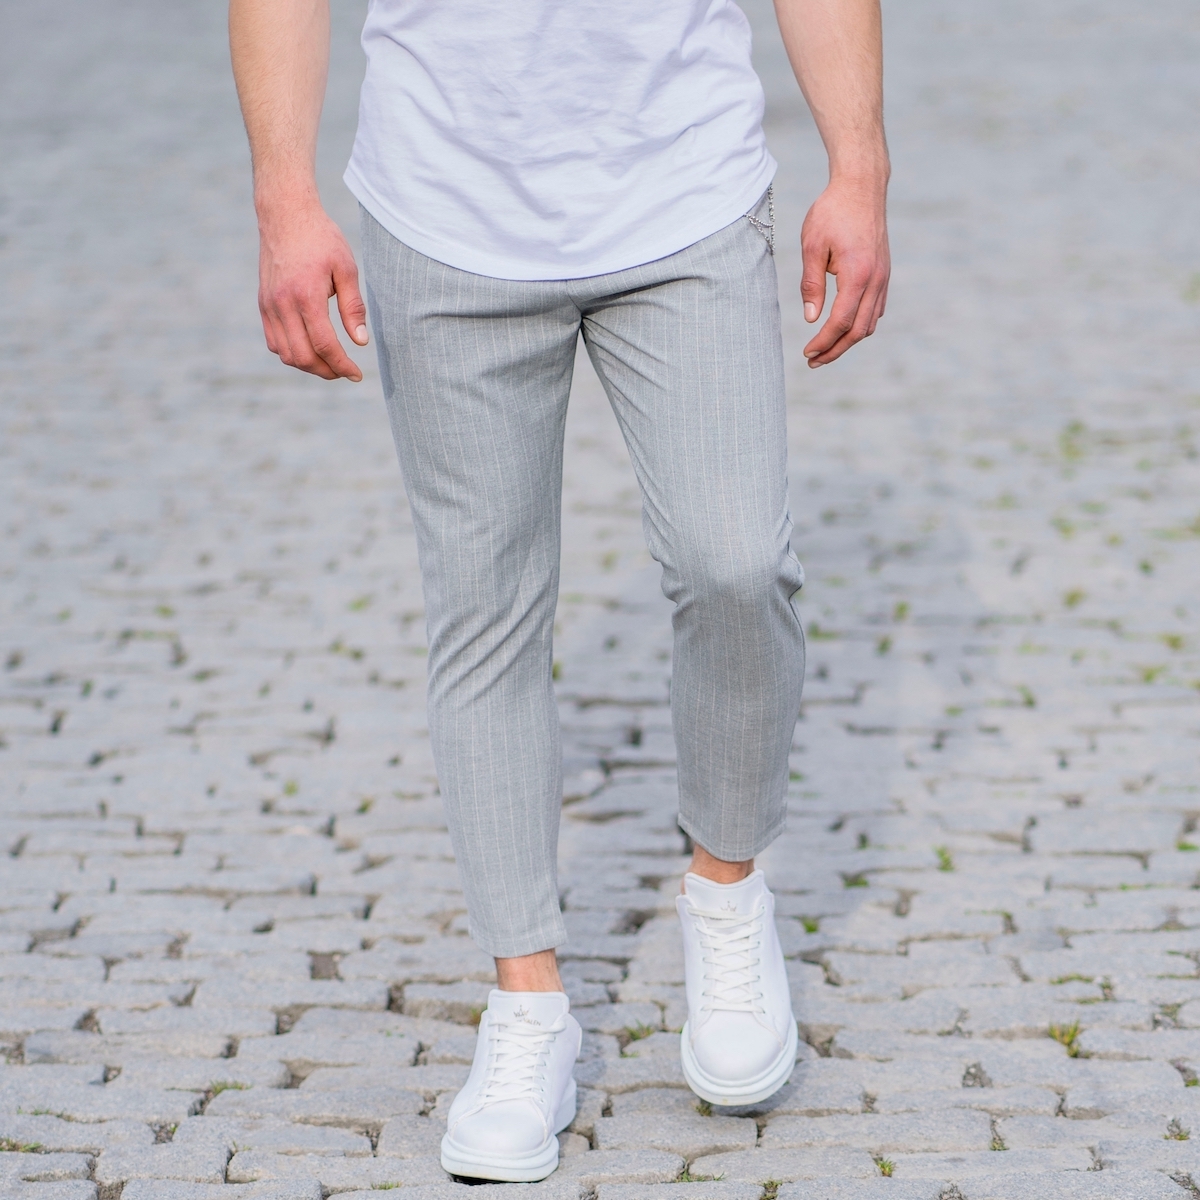 grey and white striped pants